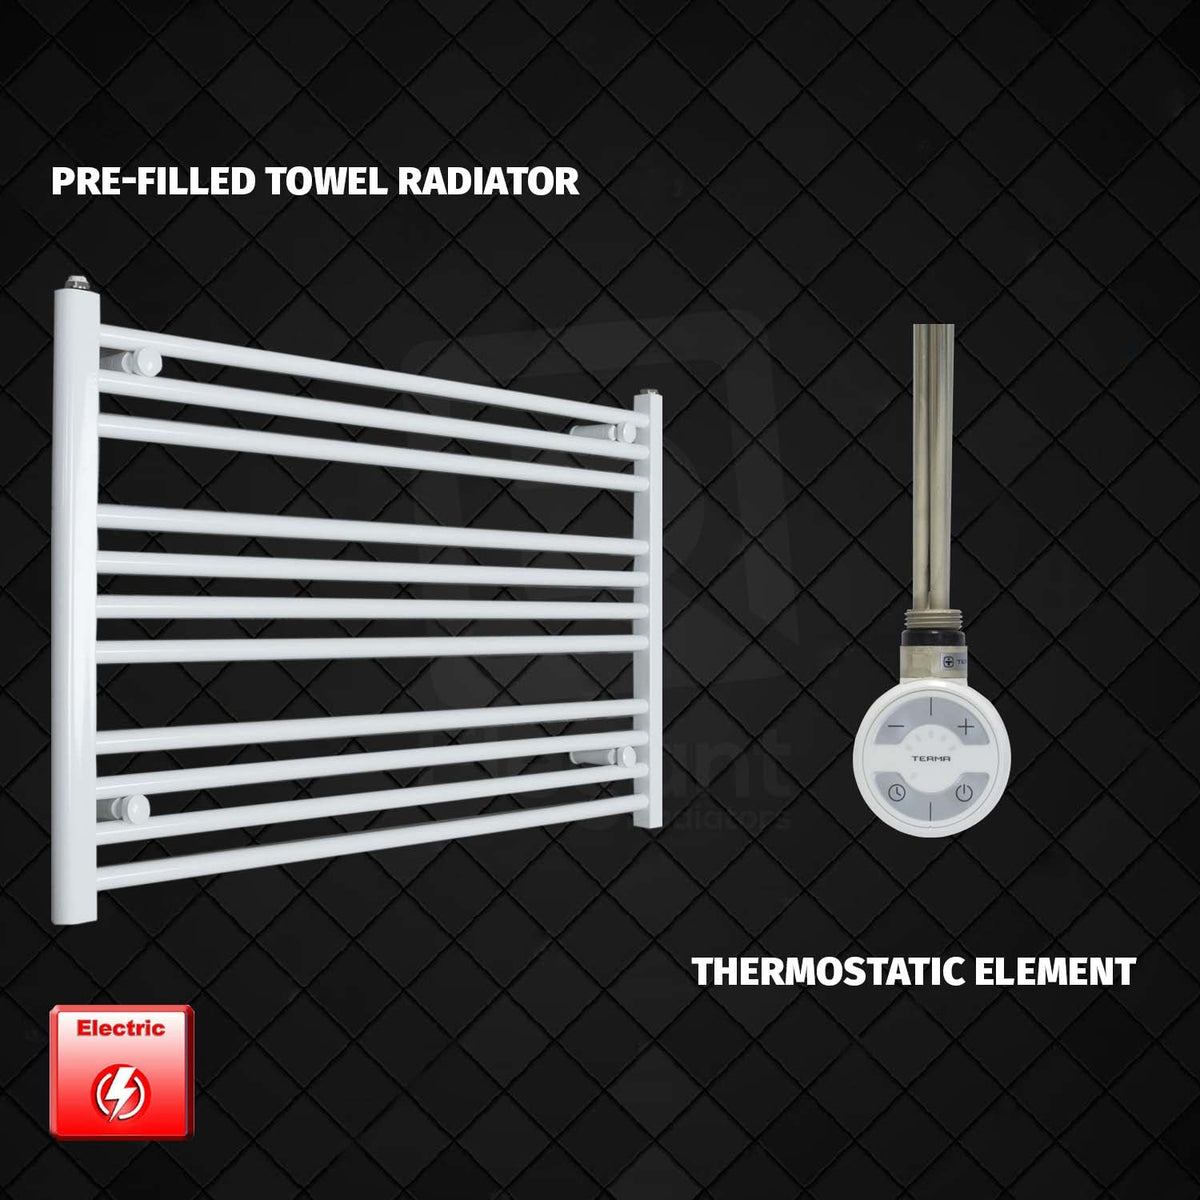 600 mm High 1100 mm Wide Pre-Filled Electric Heated Towel Rail Radiator White HTR MOA Thermostatic element no timer